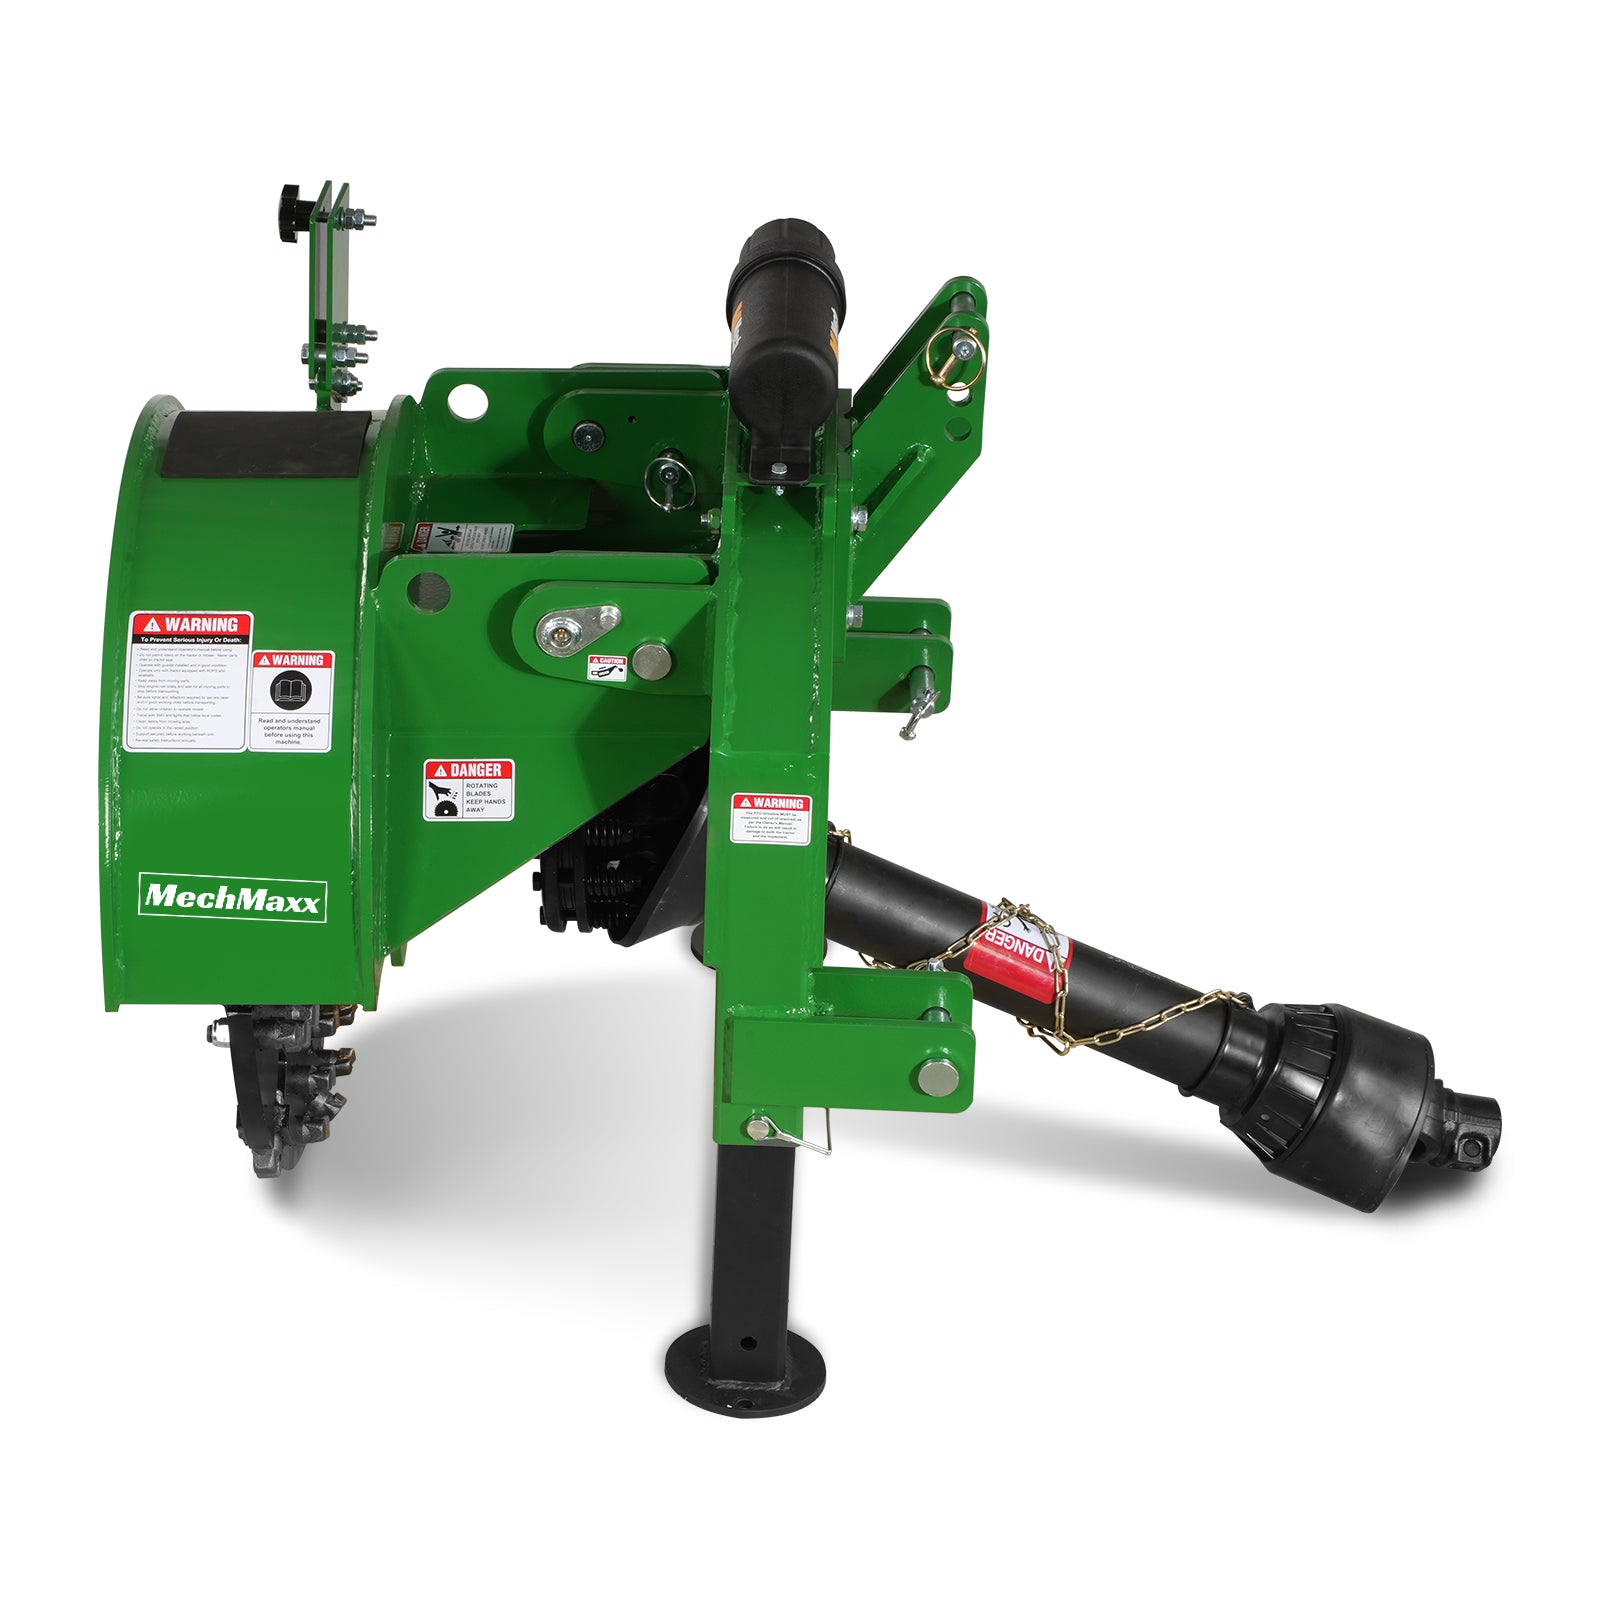 3-Point PTO Stump Grinder with 34 Carbide Teeth (PTO Shaft Included with Slip Clutch), for 15-45hp Tractor